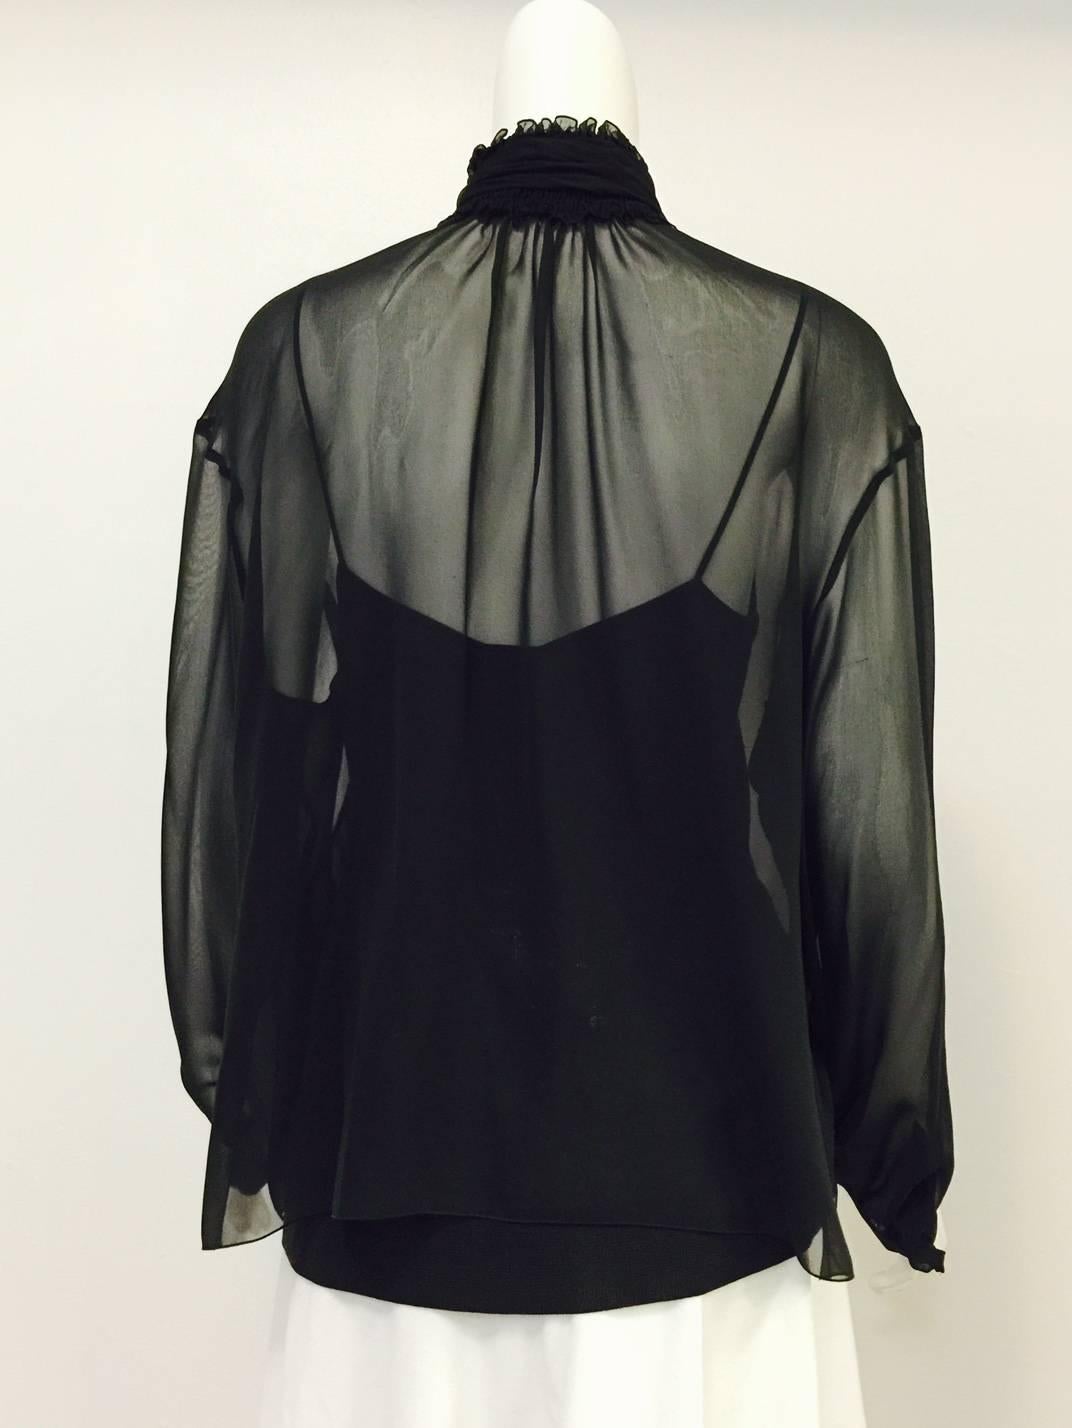 New Chanel Spring 2001 Black Sheer Silk Blouse With Knit Spaghetti Strap Tank  For Sale 2